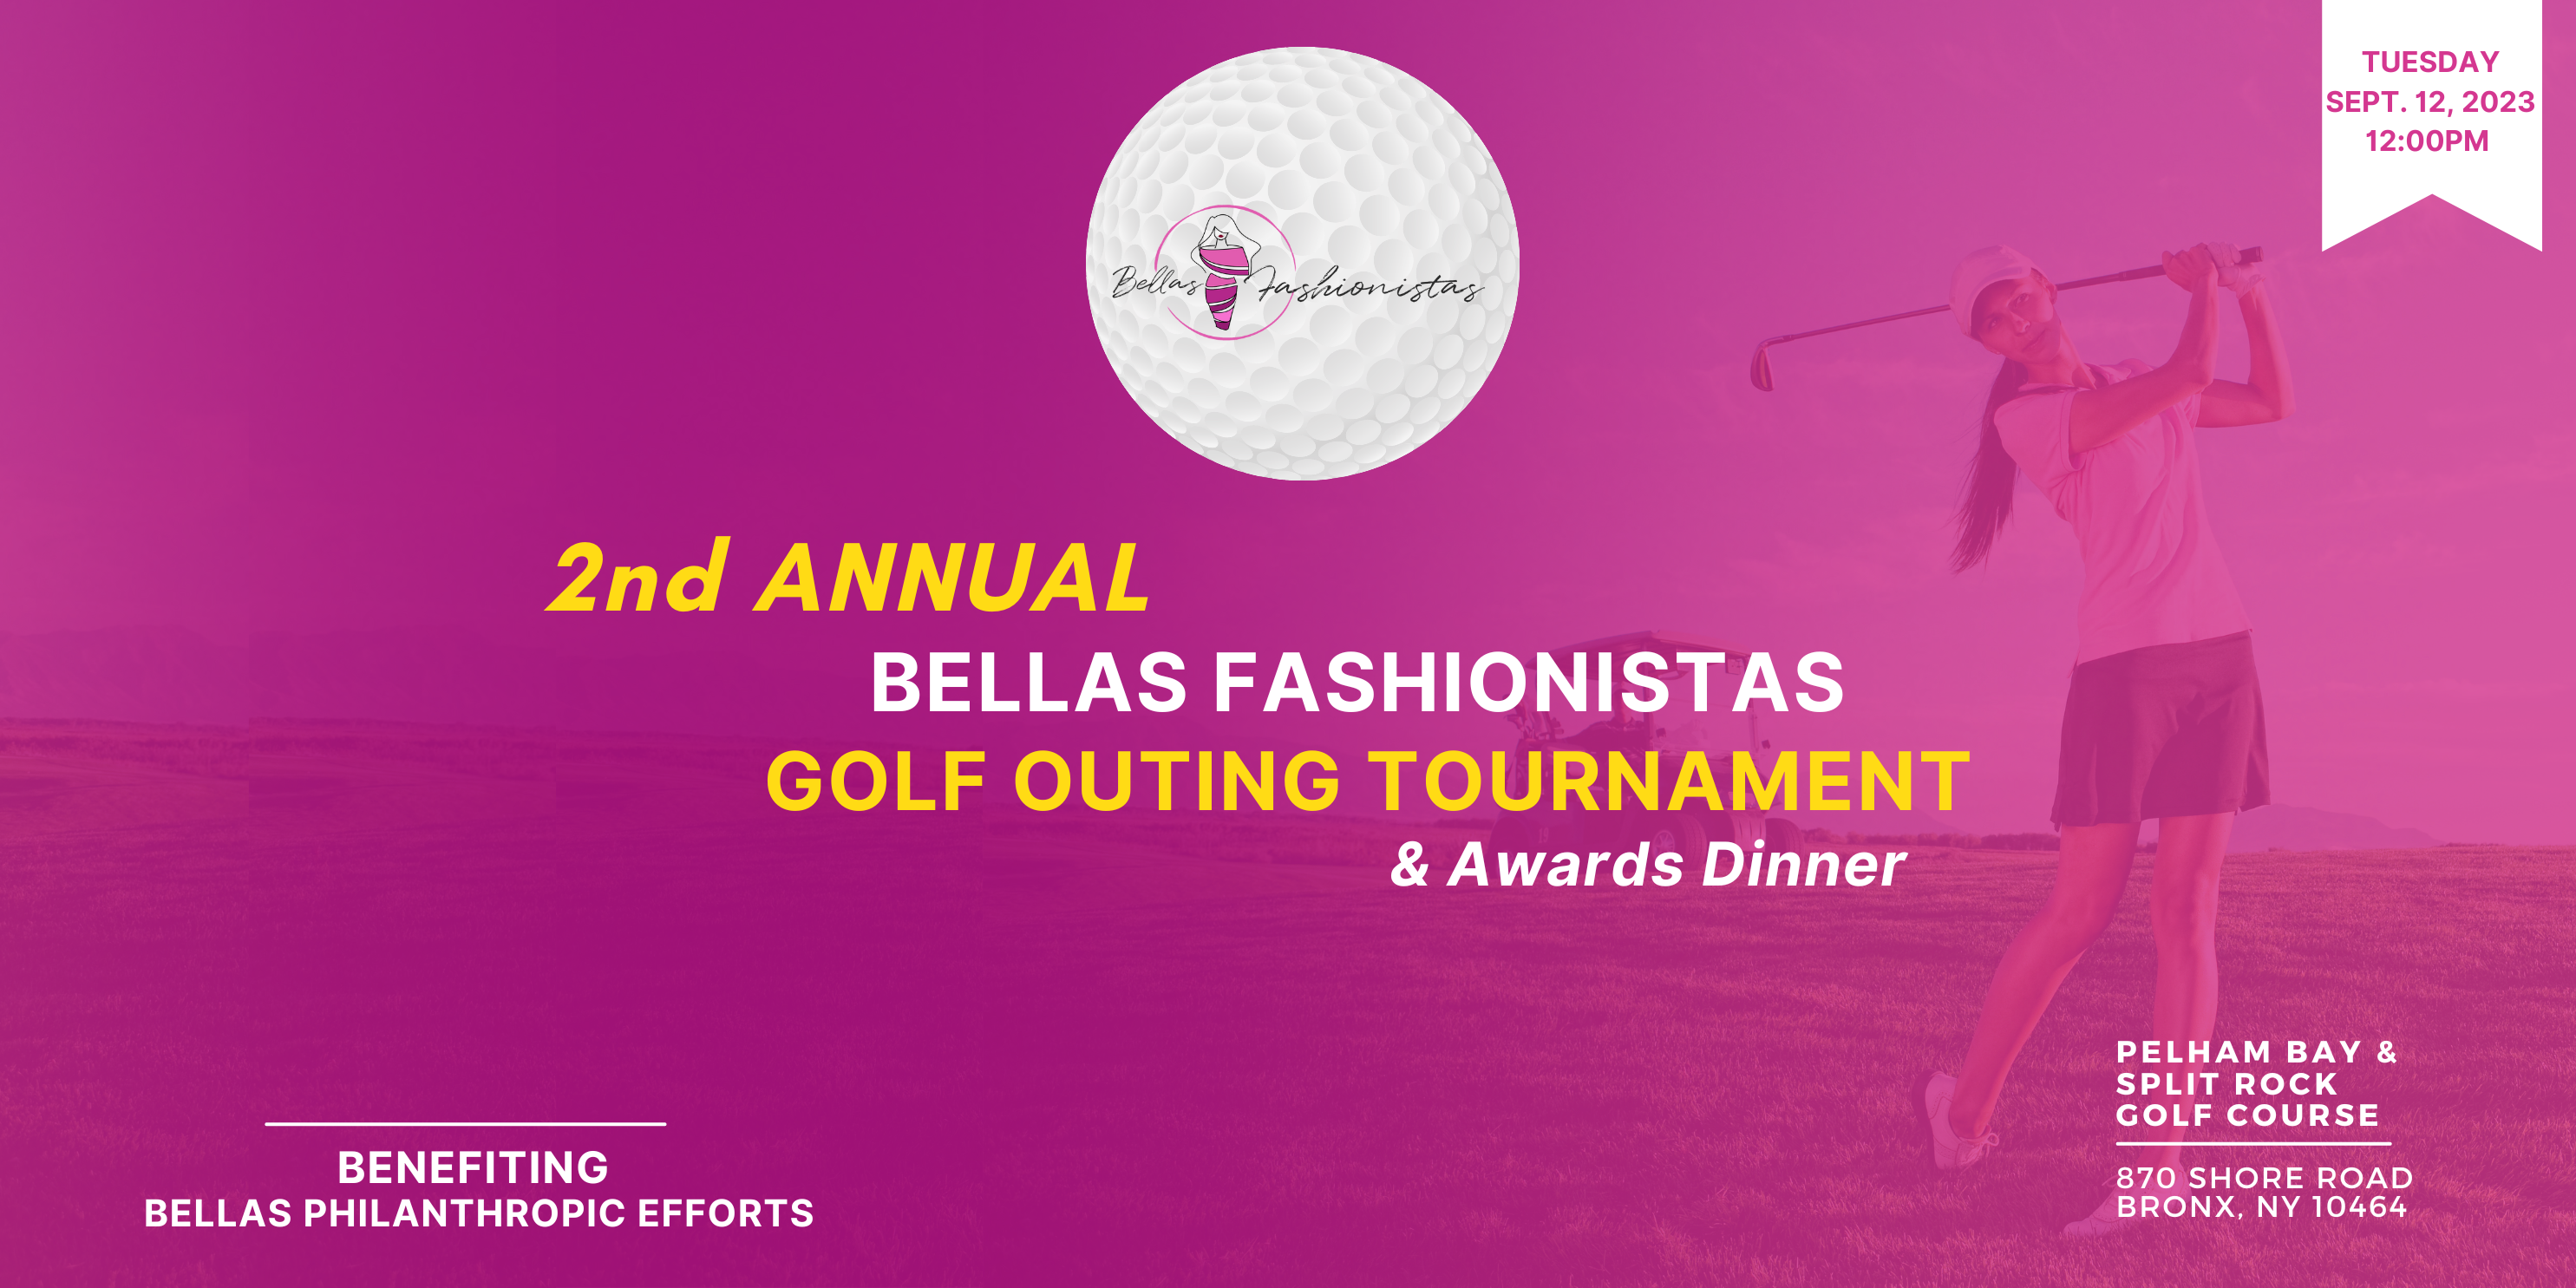 2nd Annual Bellas Fashionistas Golf Outing Tournament & Awards Dinner